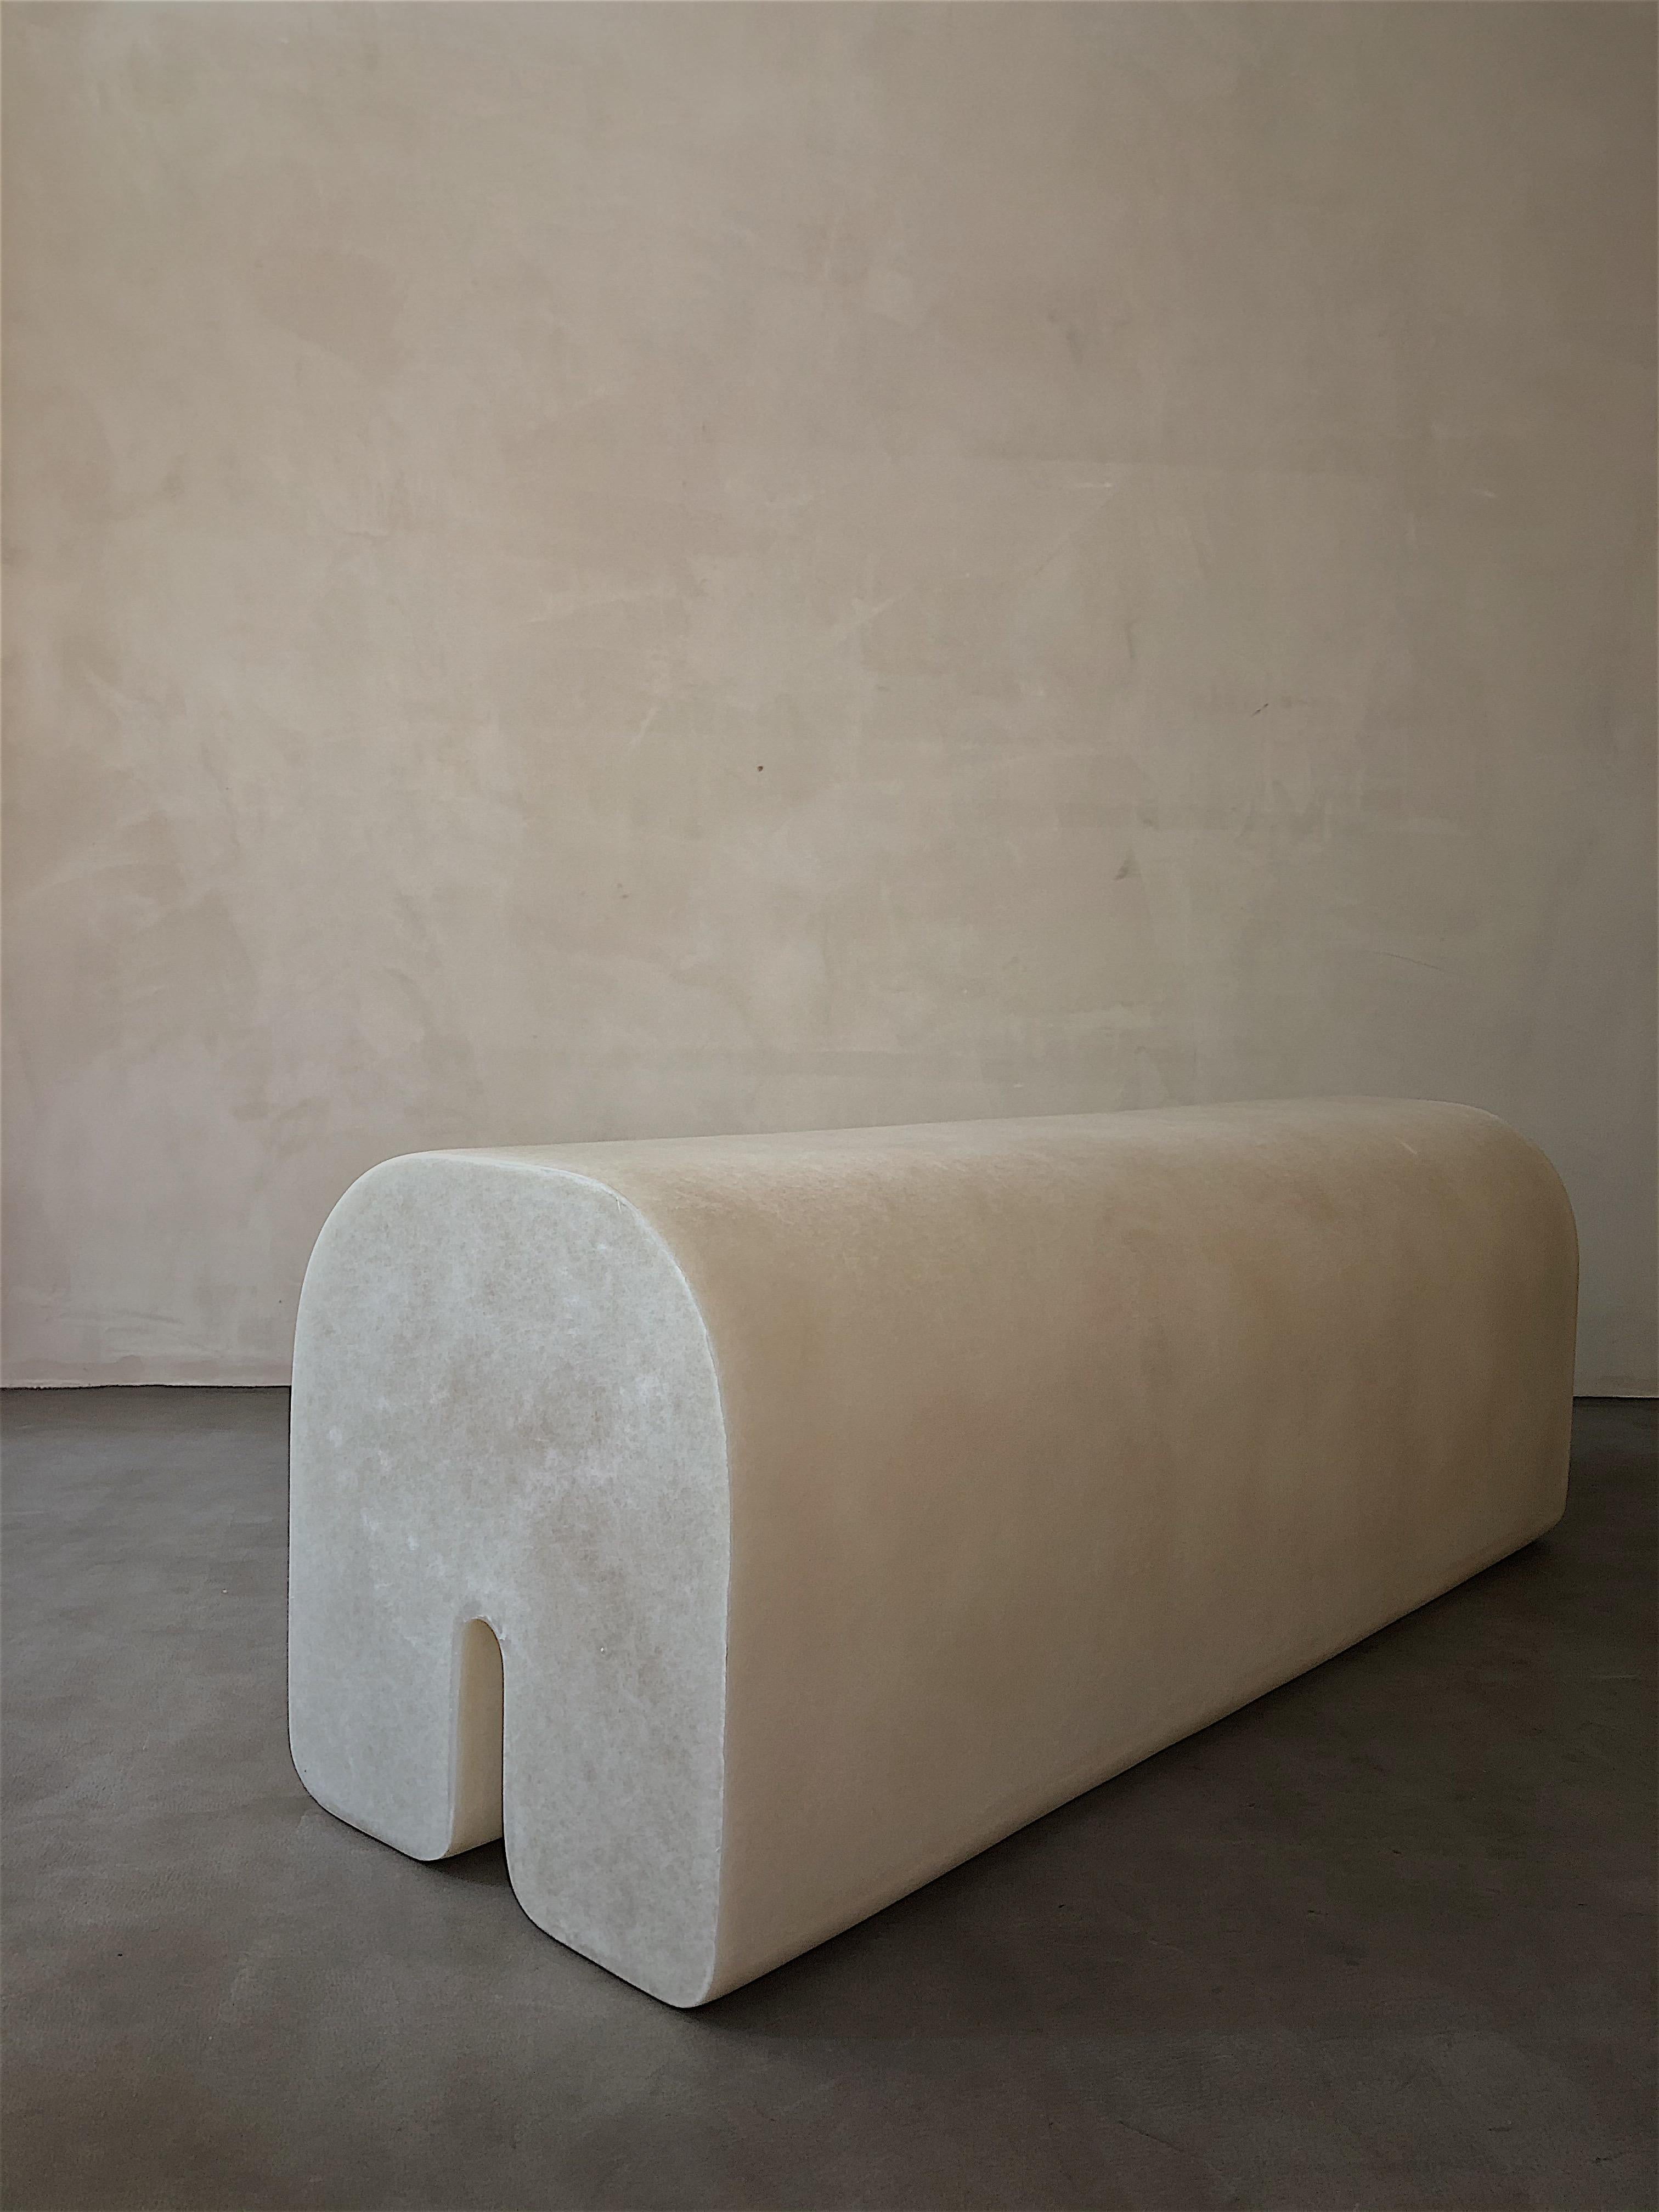 White Arch bench by Karstudio.
Materials: FRP.
Dimensions: 120 x 40 x 43 cm.

*This piece is suitable for outdoor use.

Both display ways make it the focus of the space. It could be laid as a bench, and stand up as a stand for art